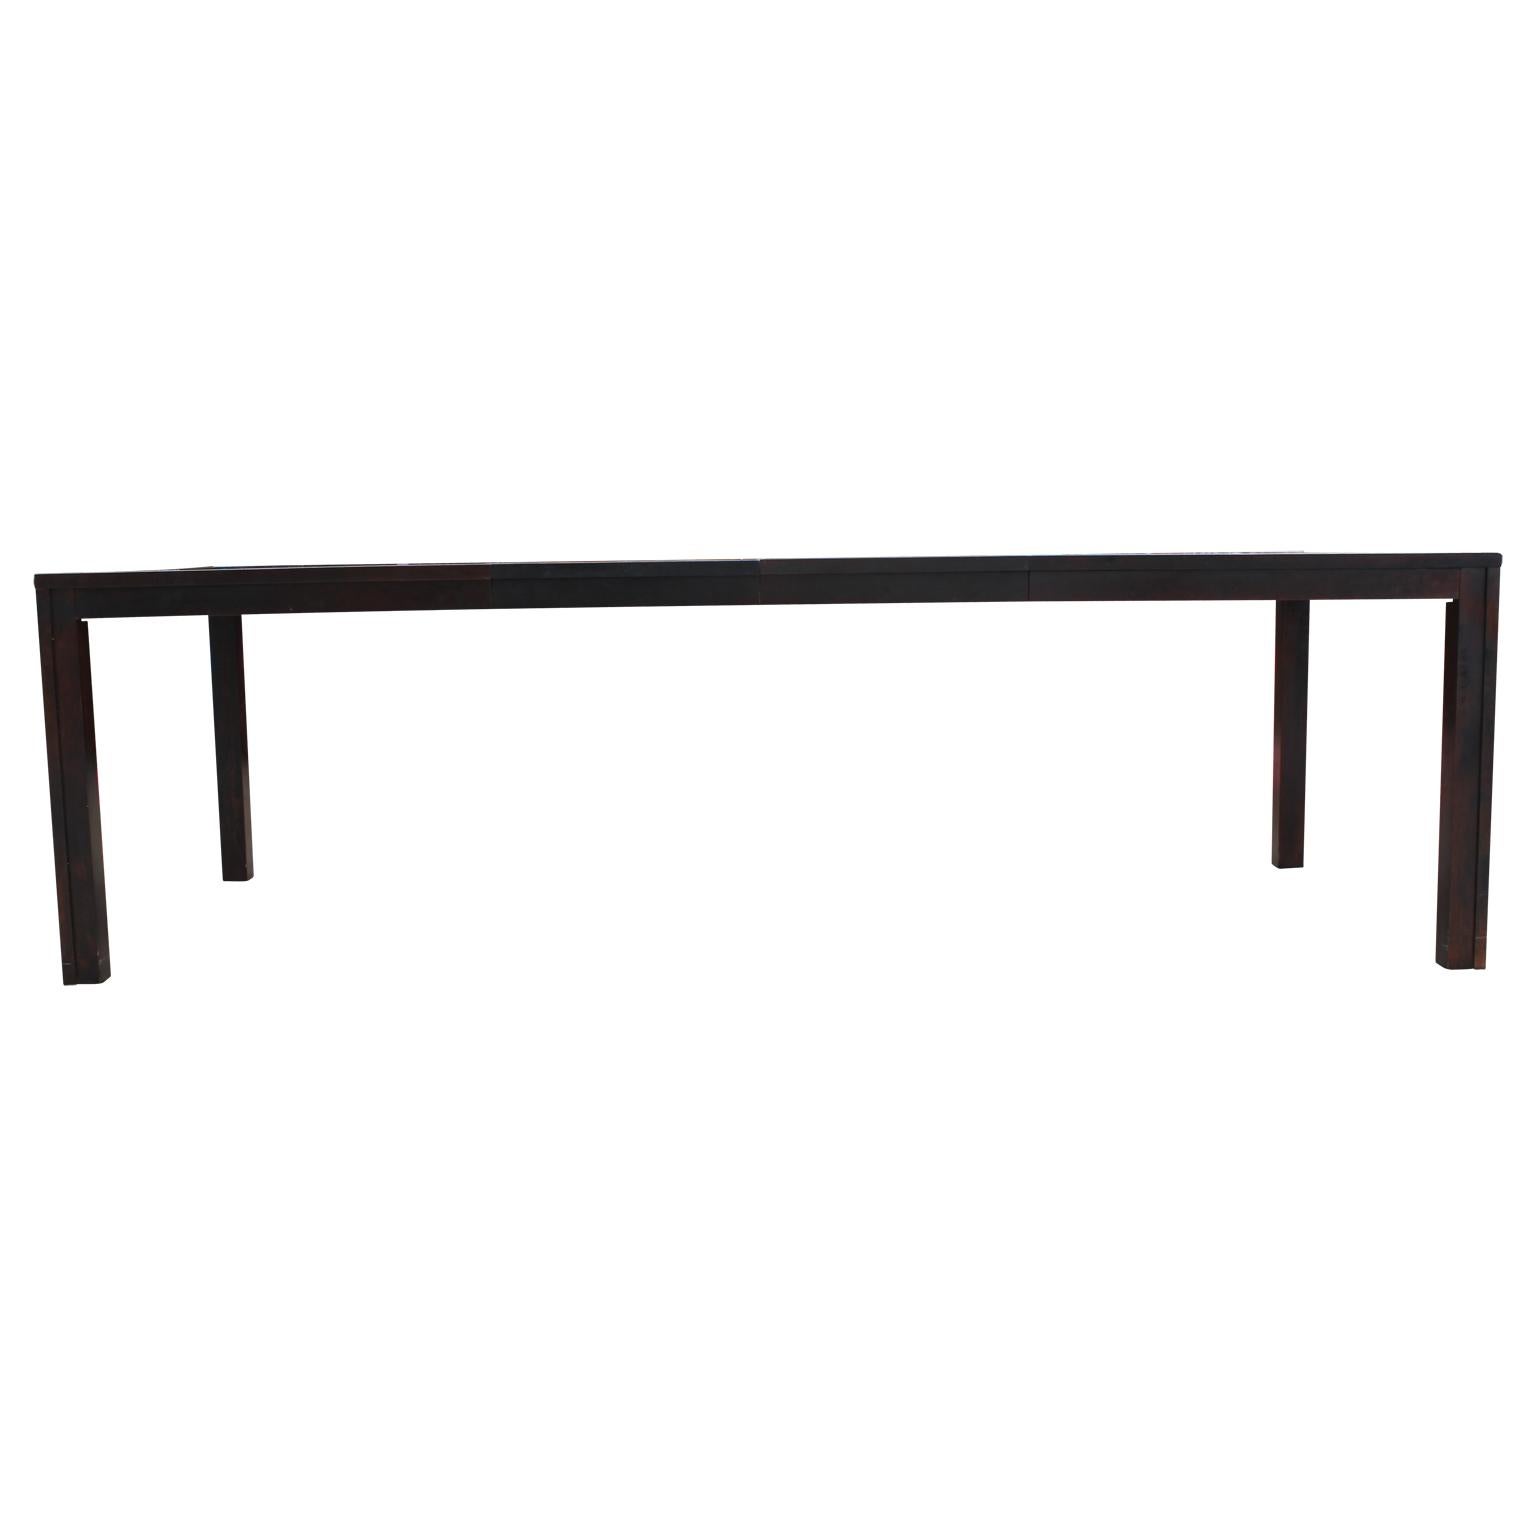 Late 20th Century Modern Rectangular Black Dining Table with a Smoked Mirror Top and Brass Inlay